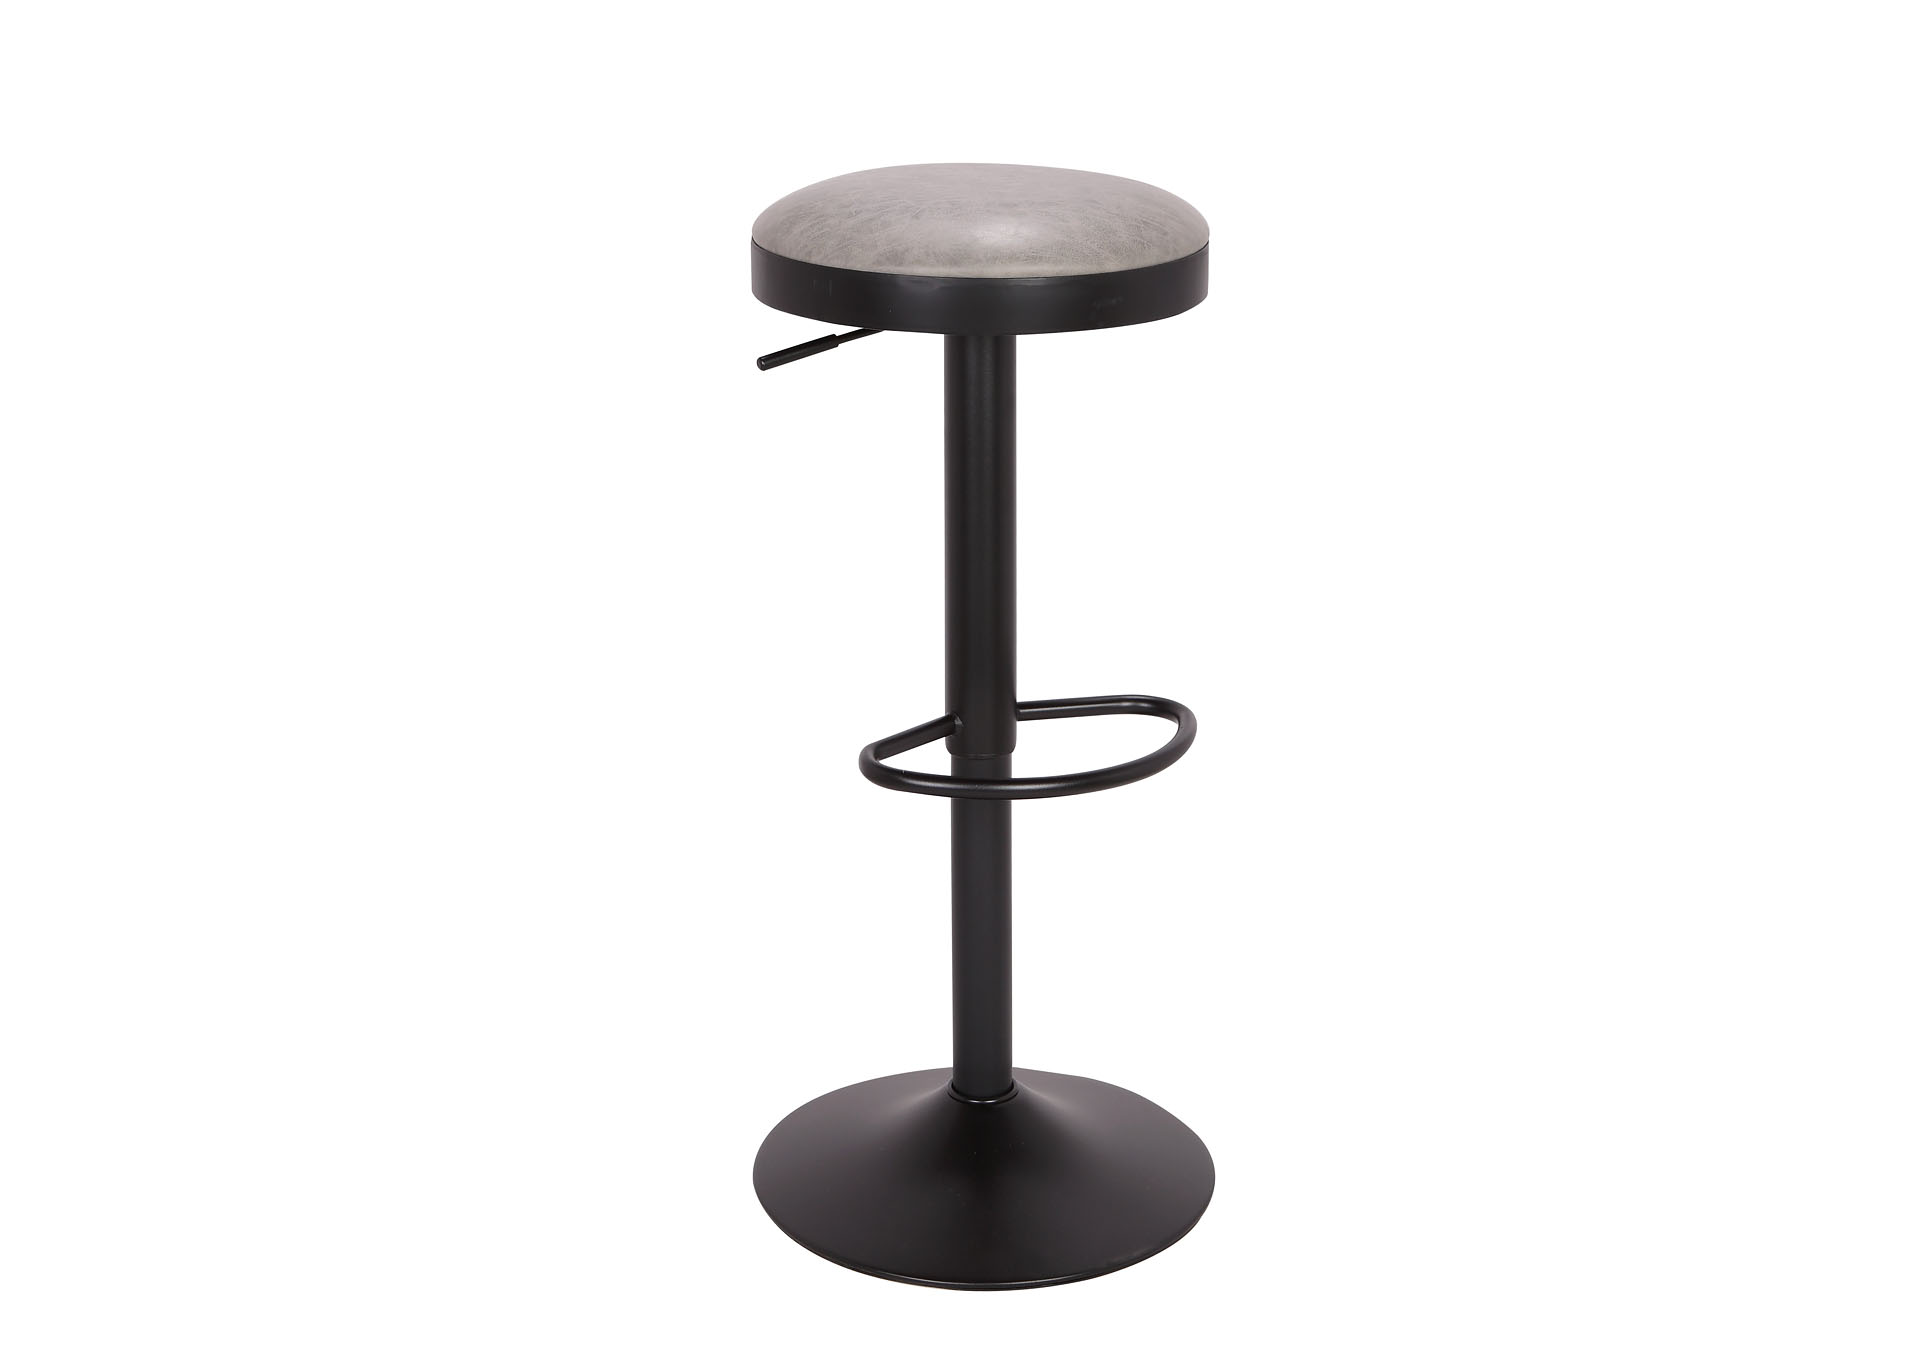 Matte Black Vintage Style Backless Adjustable Stool,Chintaly Imports